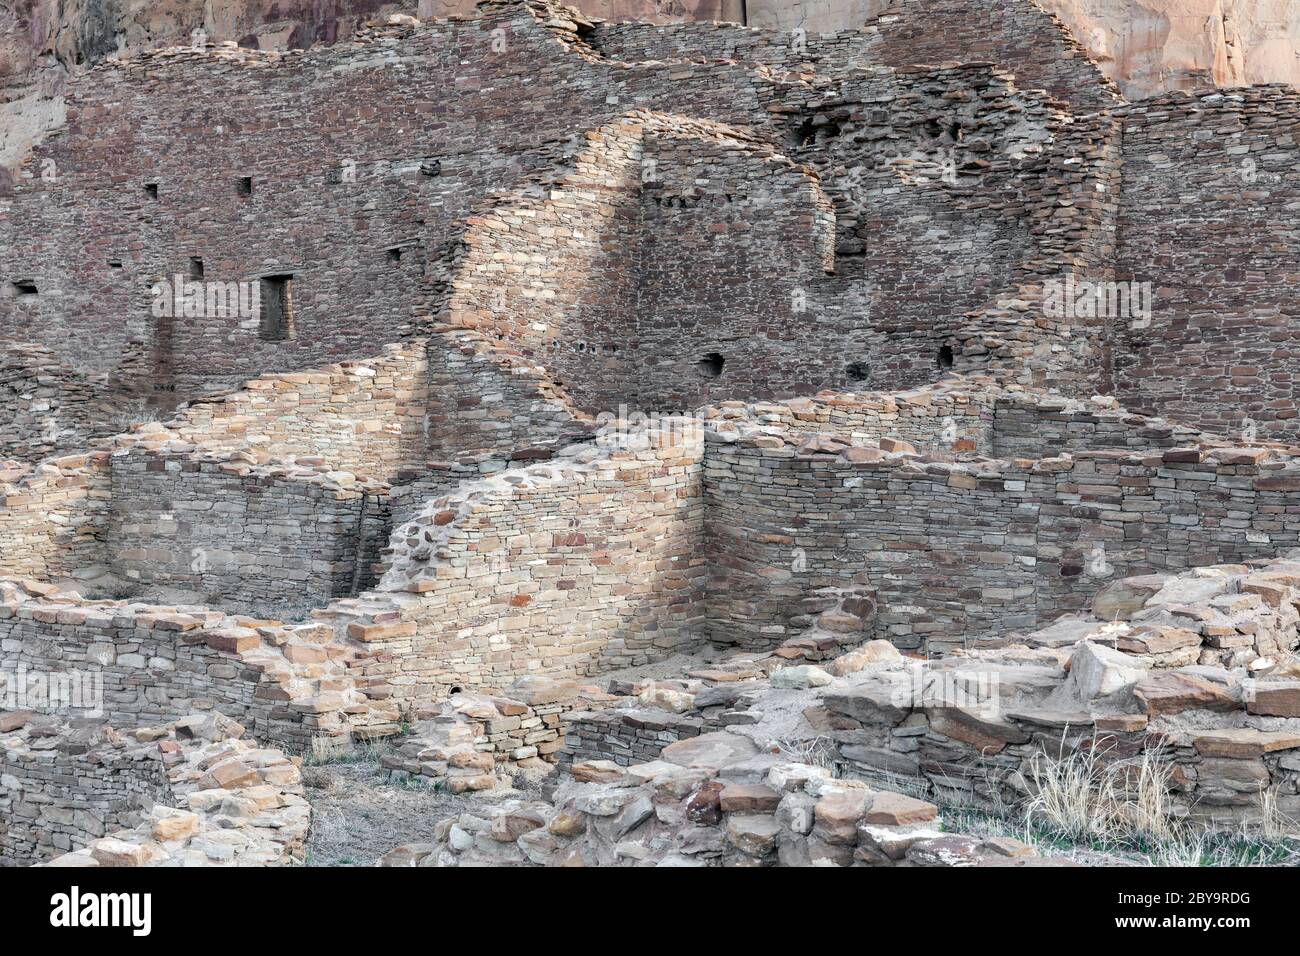 NM00584-00...NEW MEXICO - Masonry stone walls of Kin Kletso built by the early Chaco People.  Chaco Culture National Historic Park. Stock Photo